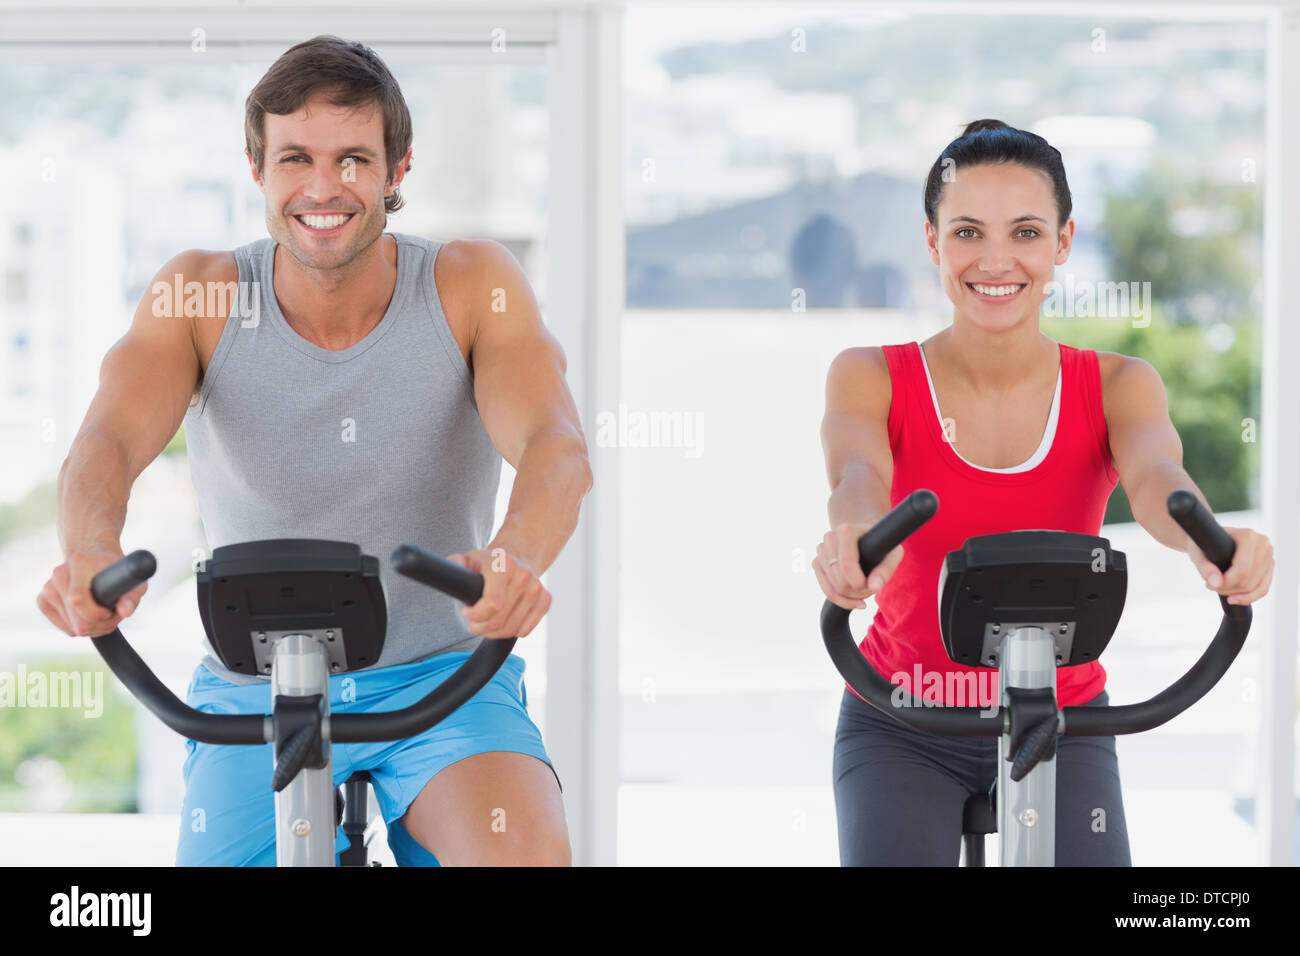 Smiling young couple working out at spinning class Banque D'Images